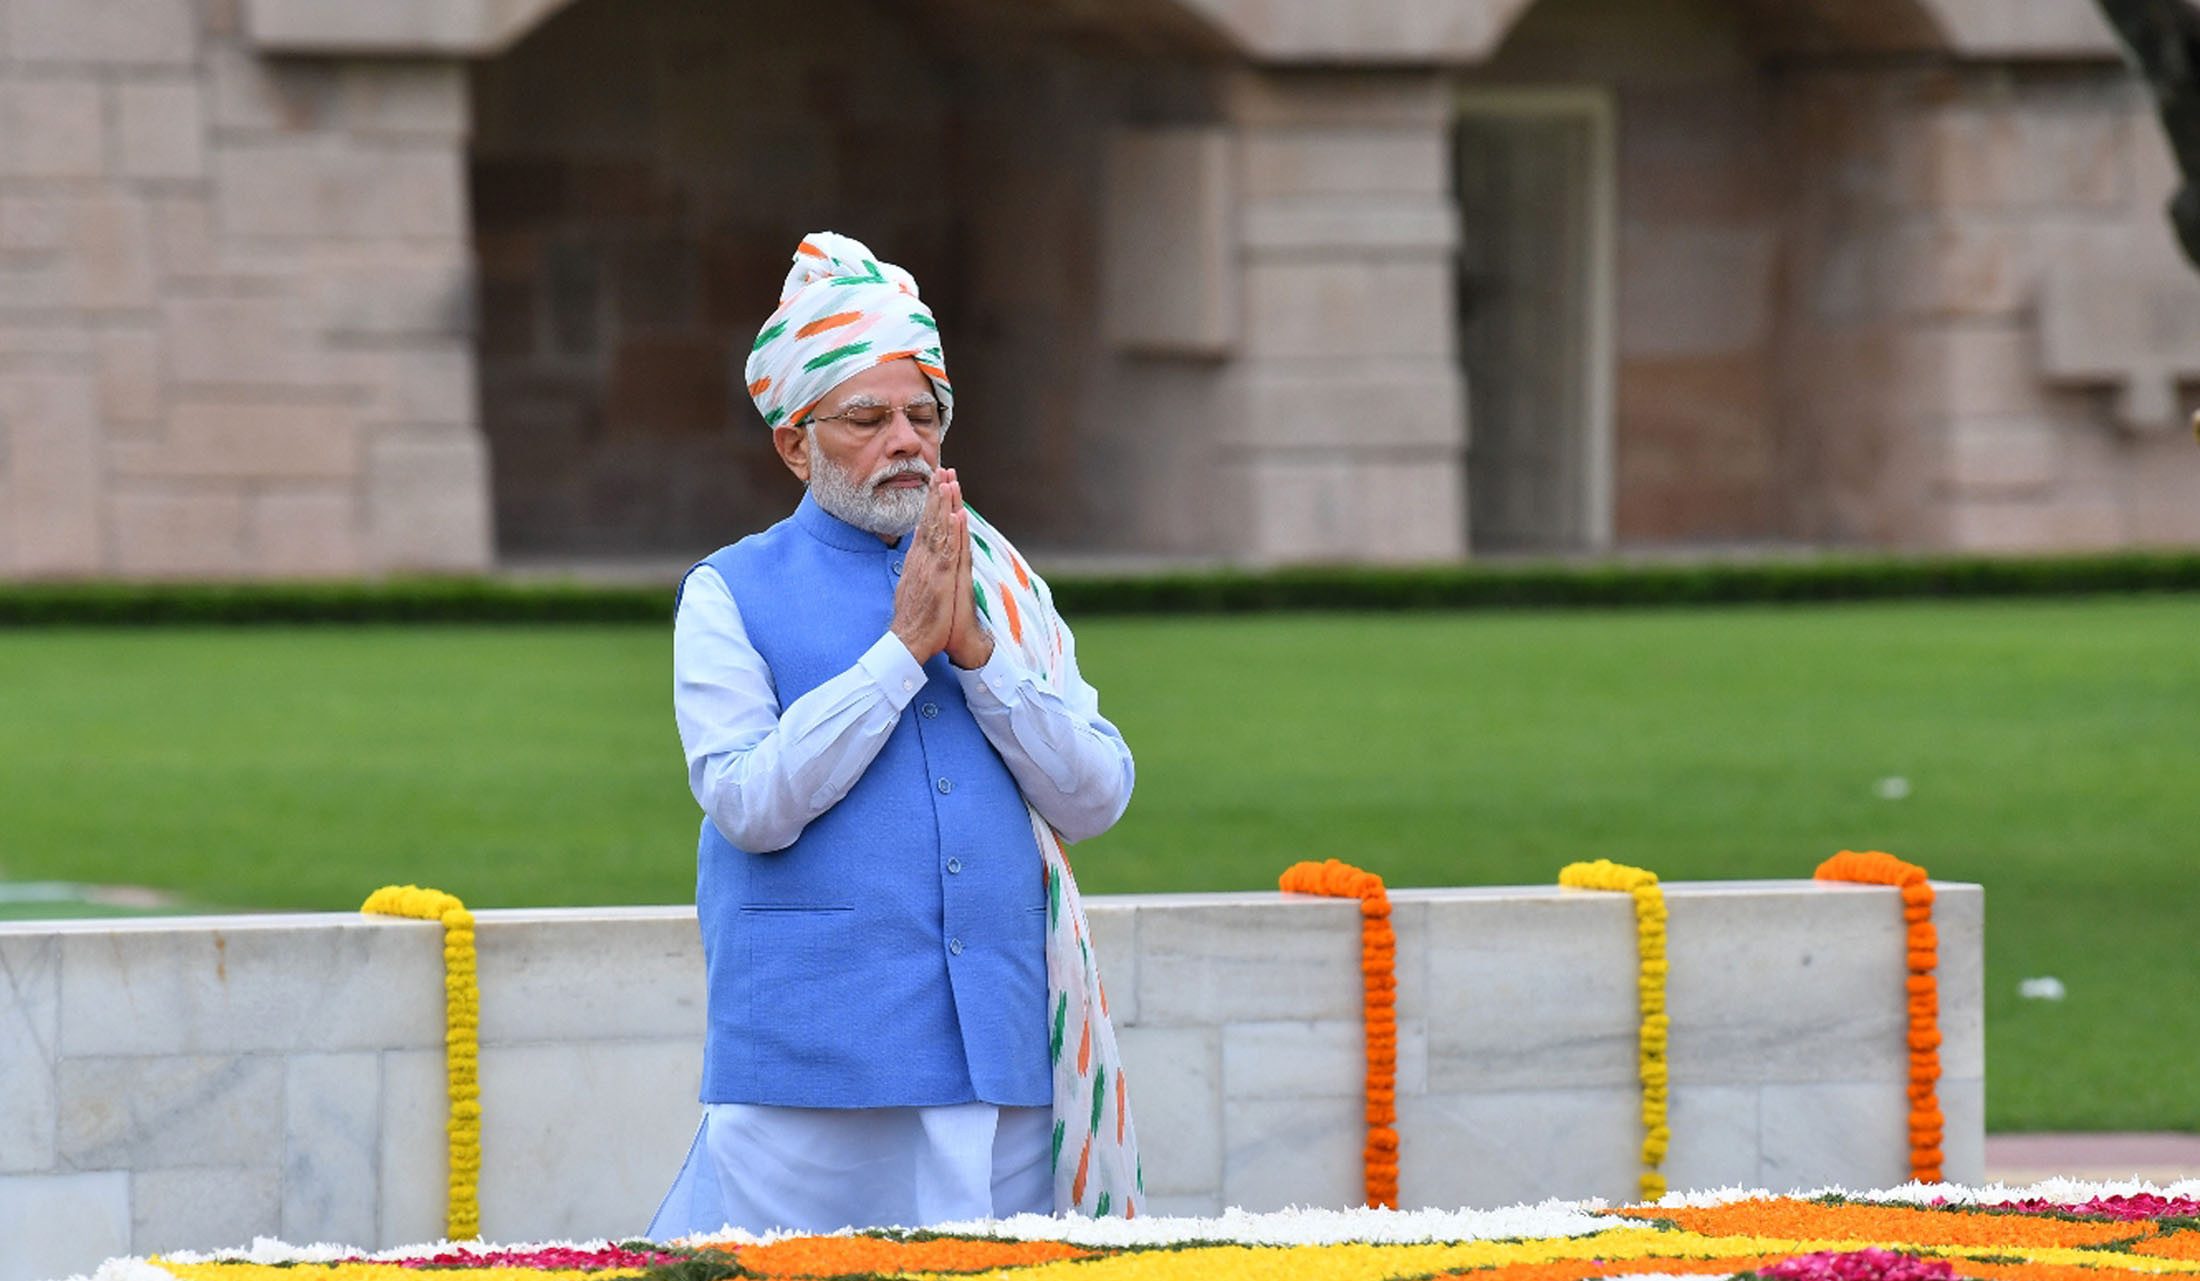 Prime Minister Narendra Modi paying homage at Mahatma Gandhi memorial at New Delhi ahead of his 76th Independence Day speech. Source: PIB